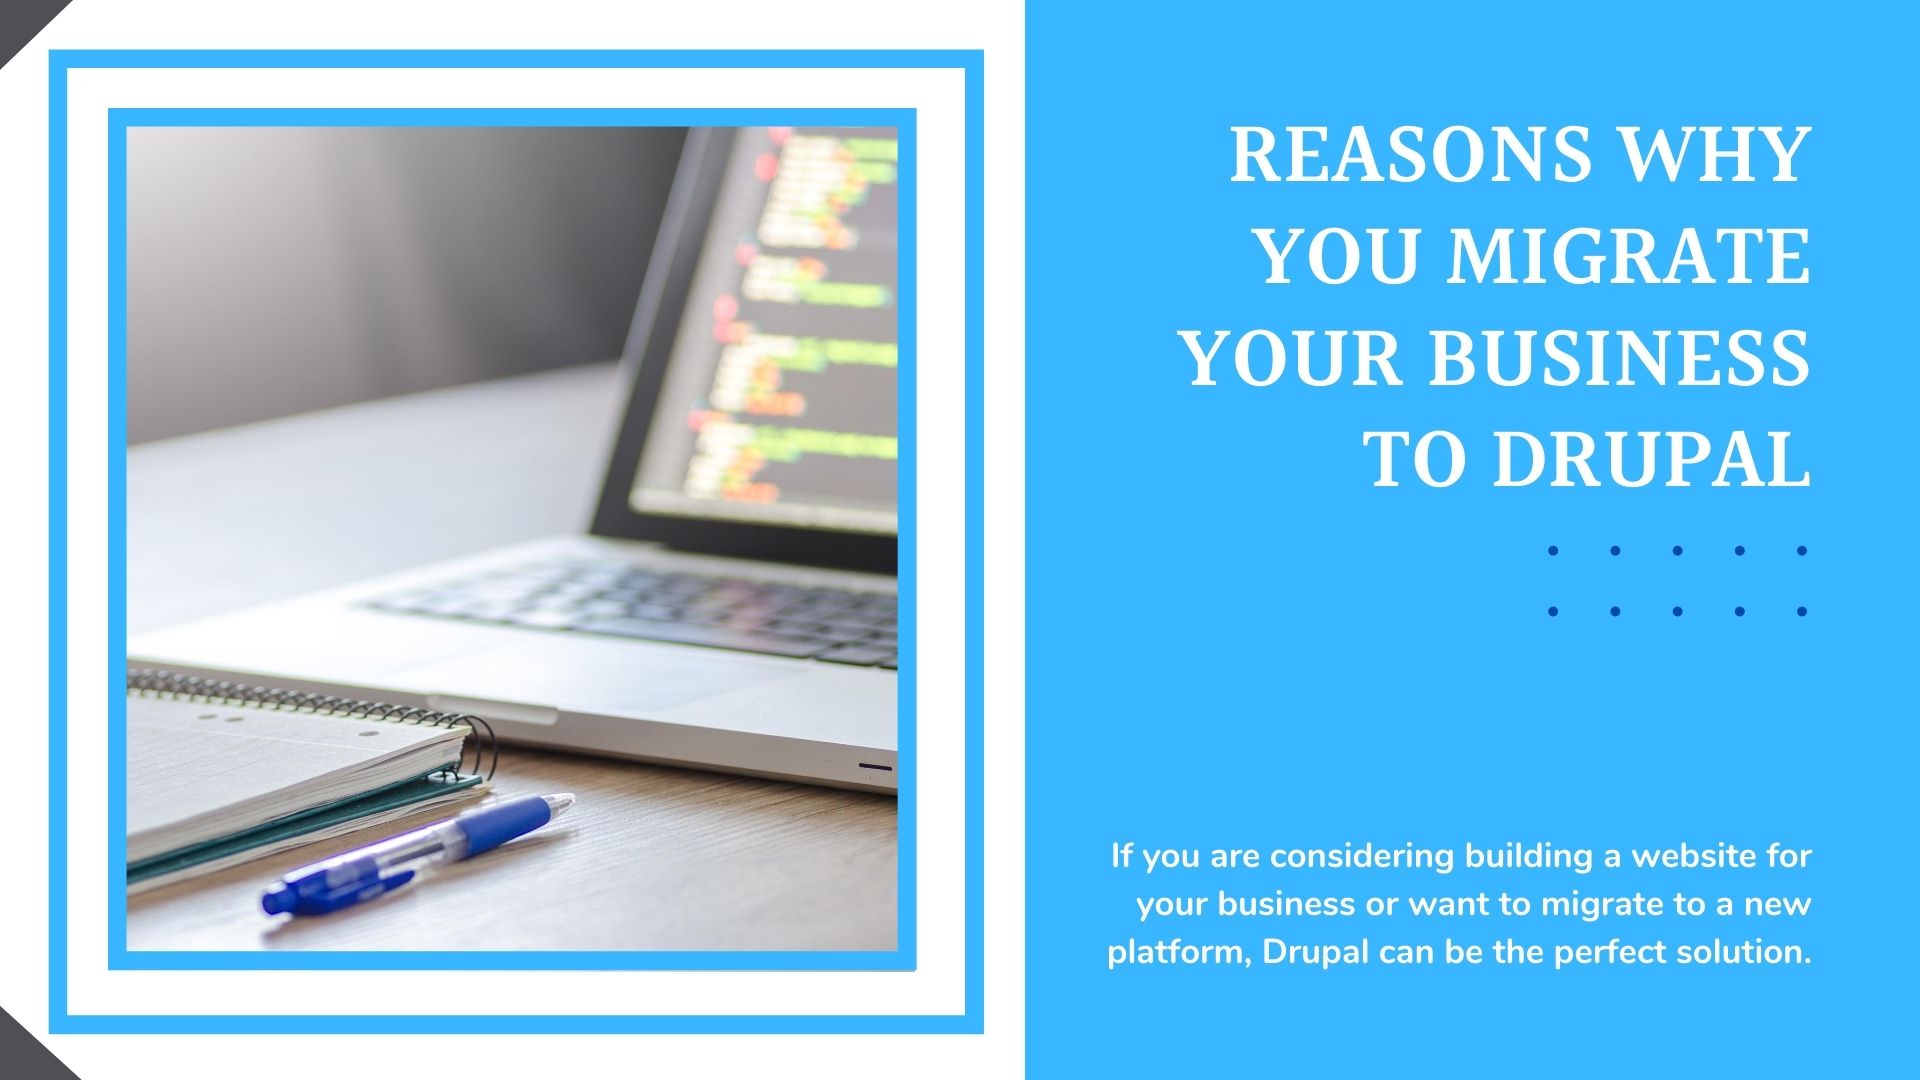 Reasons Why You migrate Your Business To Drupal